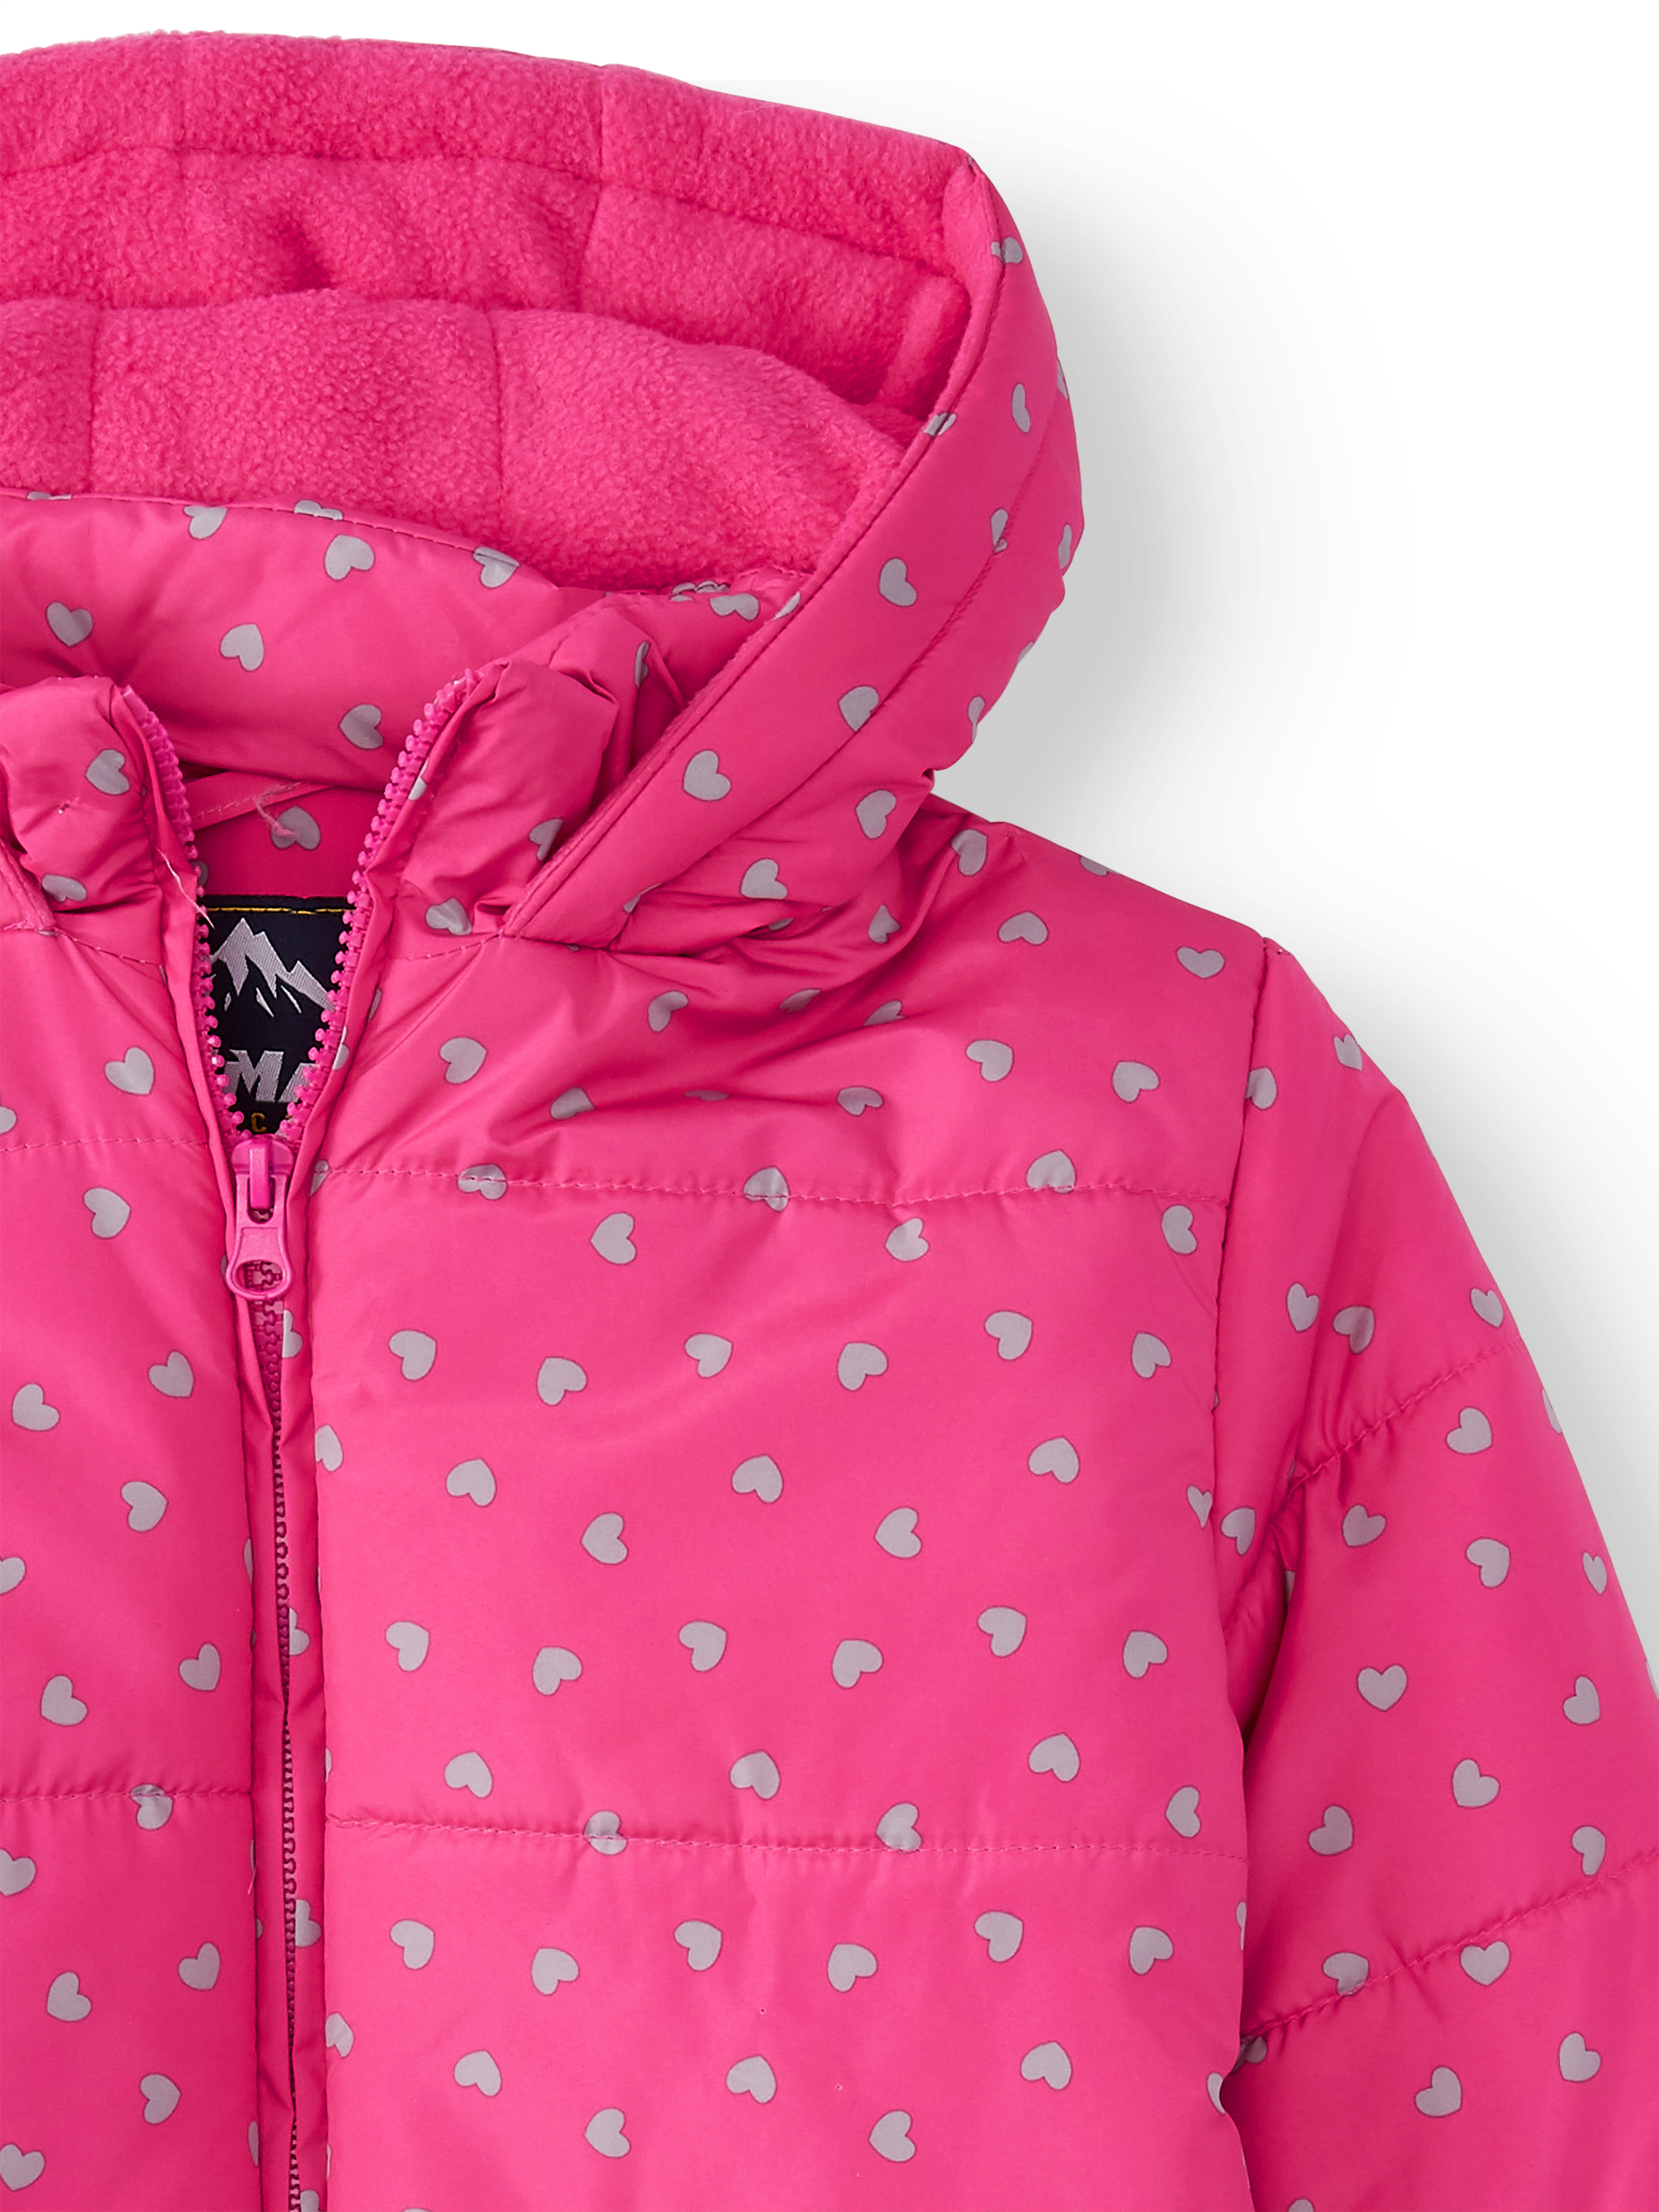 Climate Concepts Heart Print Bubble Jacket (Little Girls & Big Girls) - image 2 of 2